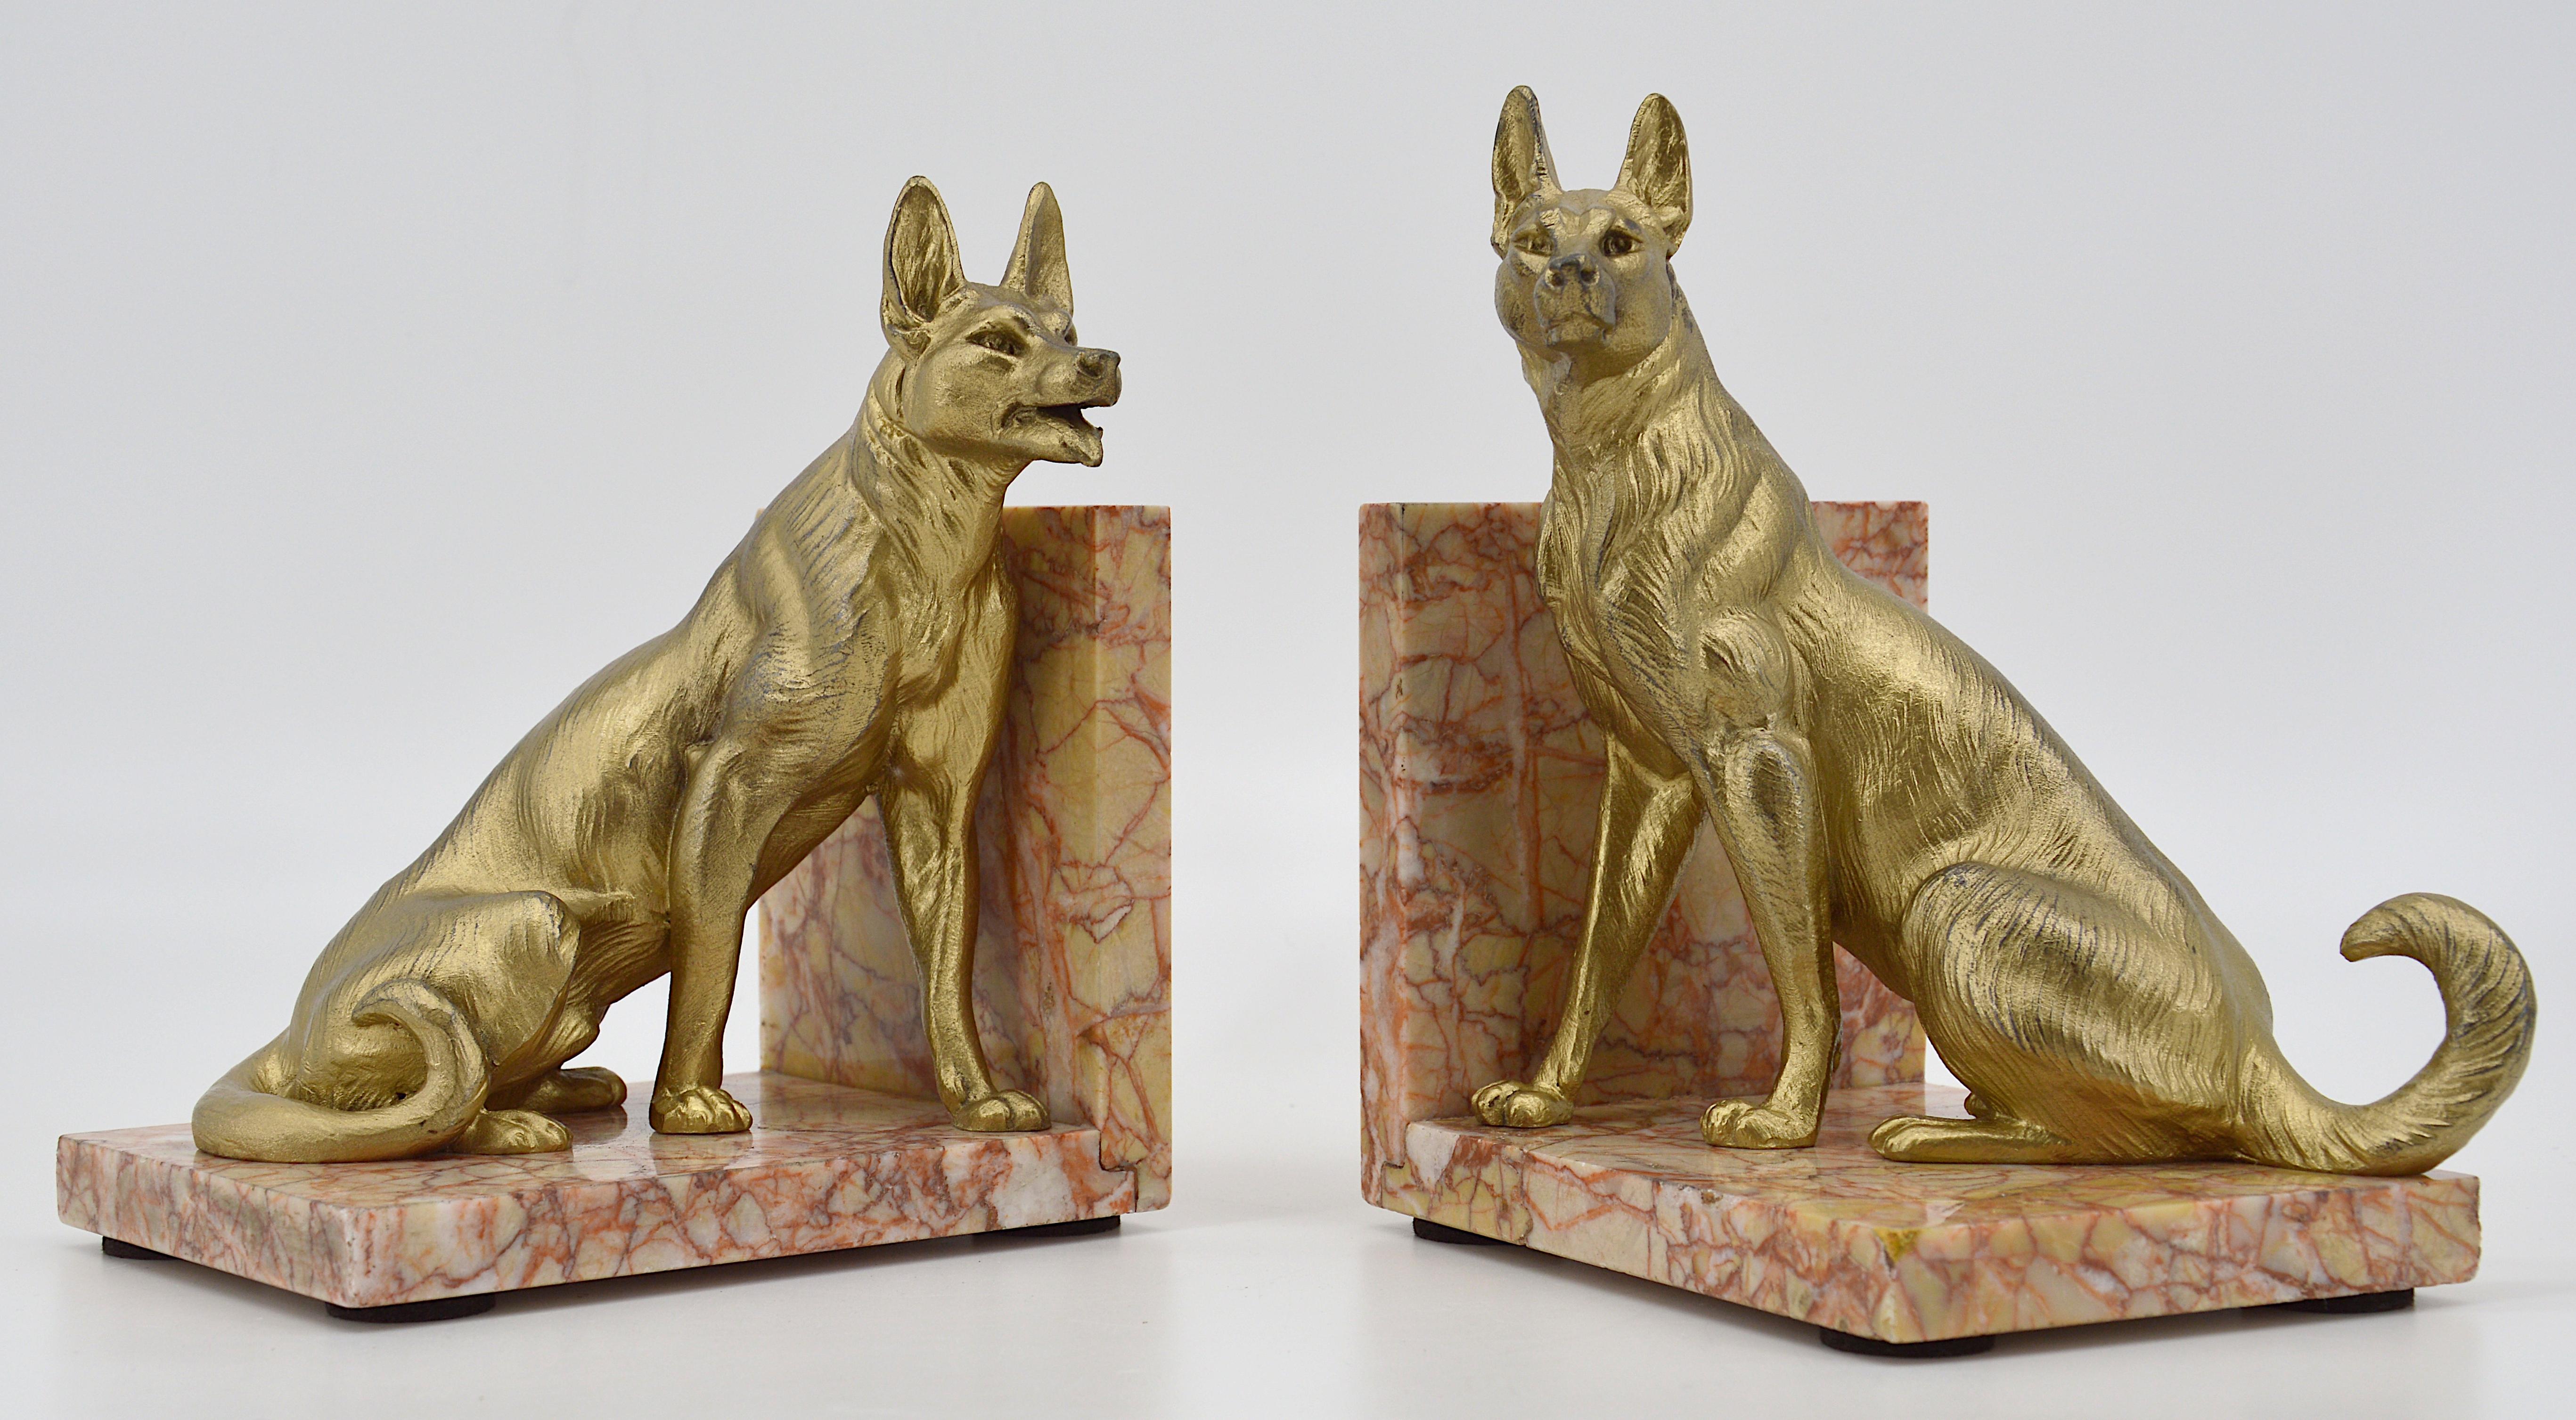 French Art Deco bookends by Louis-Albert Carvin, France, circa 1930. German shepherds. Gilt spelter dogs. Marble bases. Measures: Height 7.5